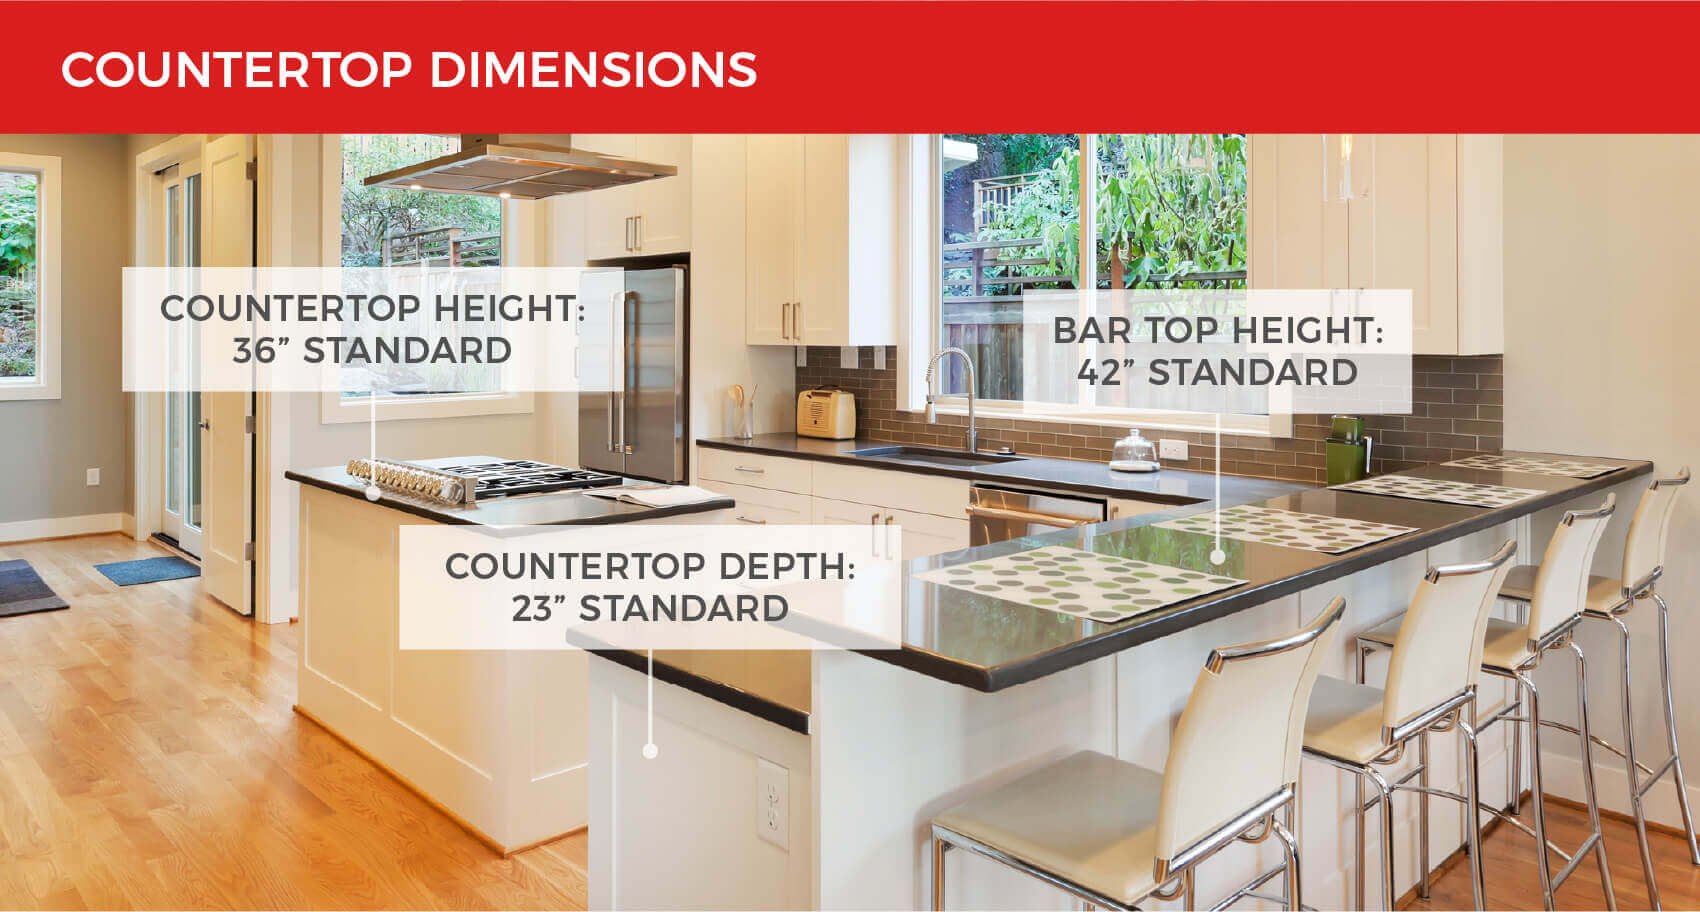 Diagram of kitchen with labels showing standard countertop measurements.